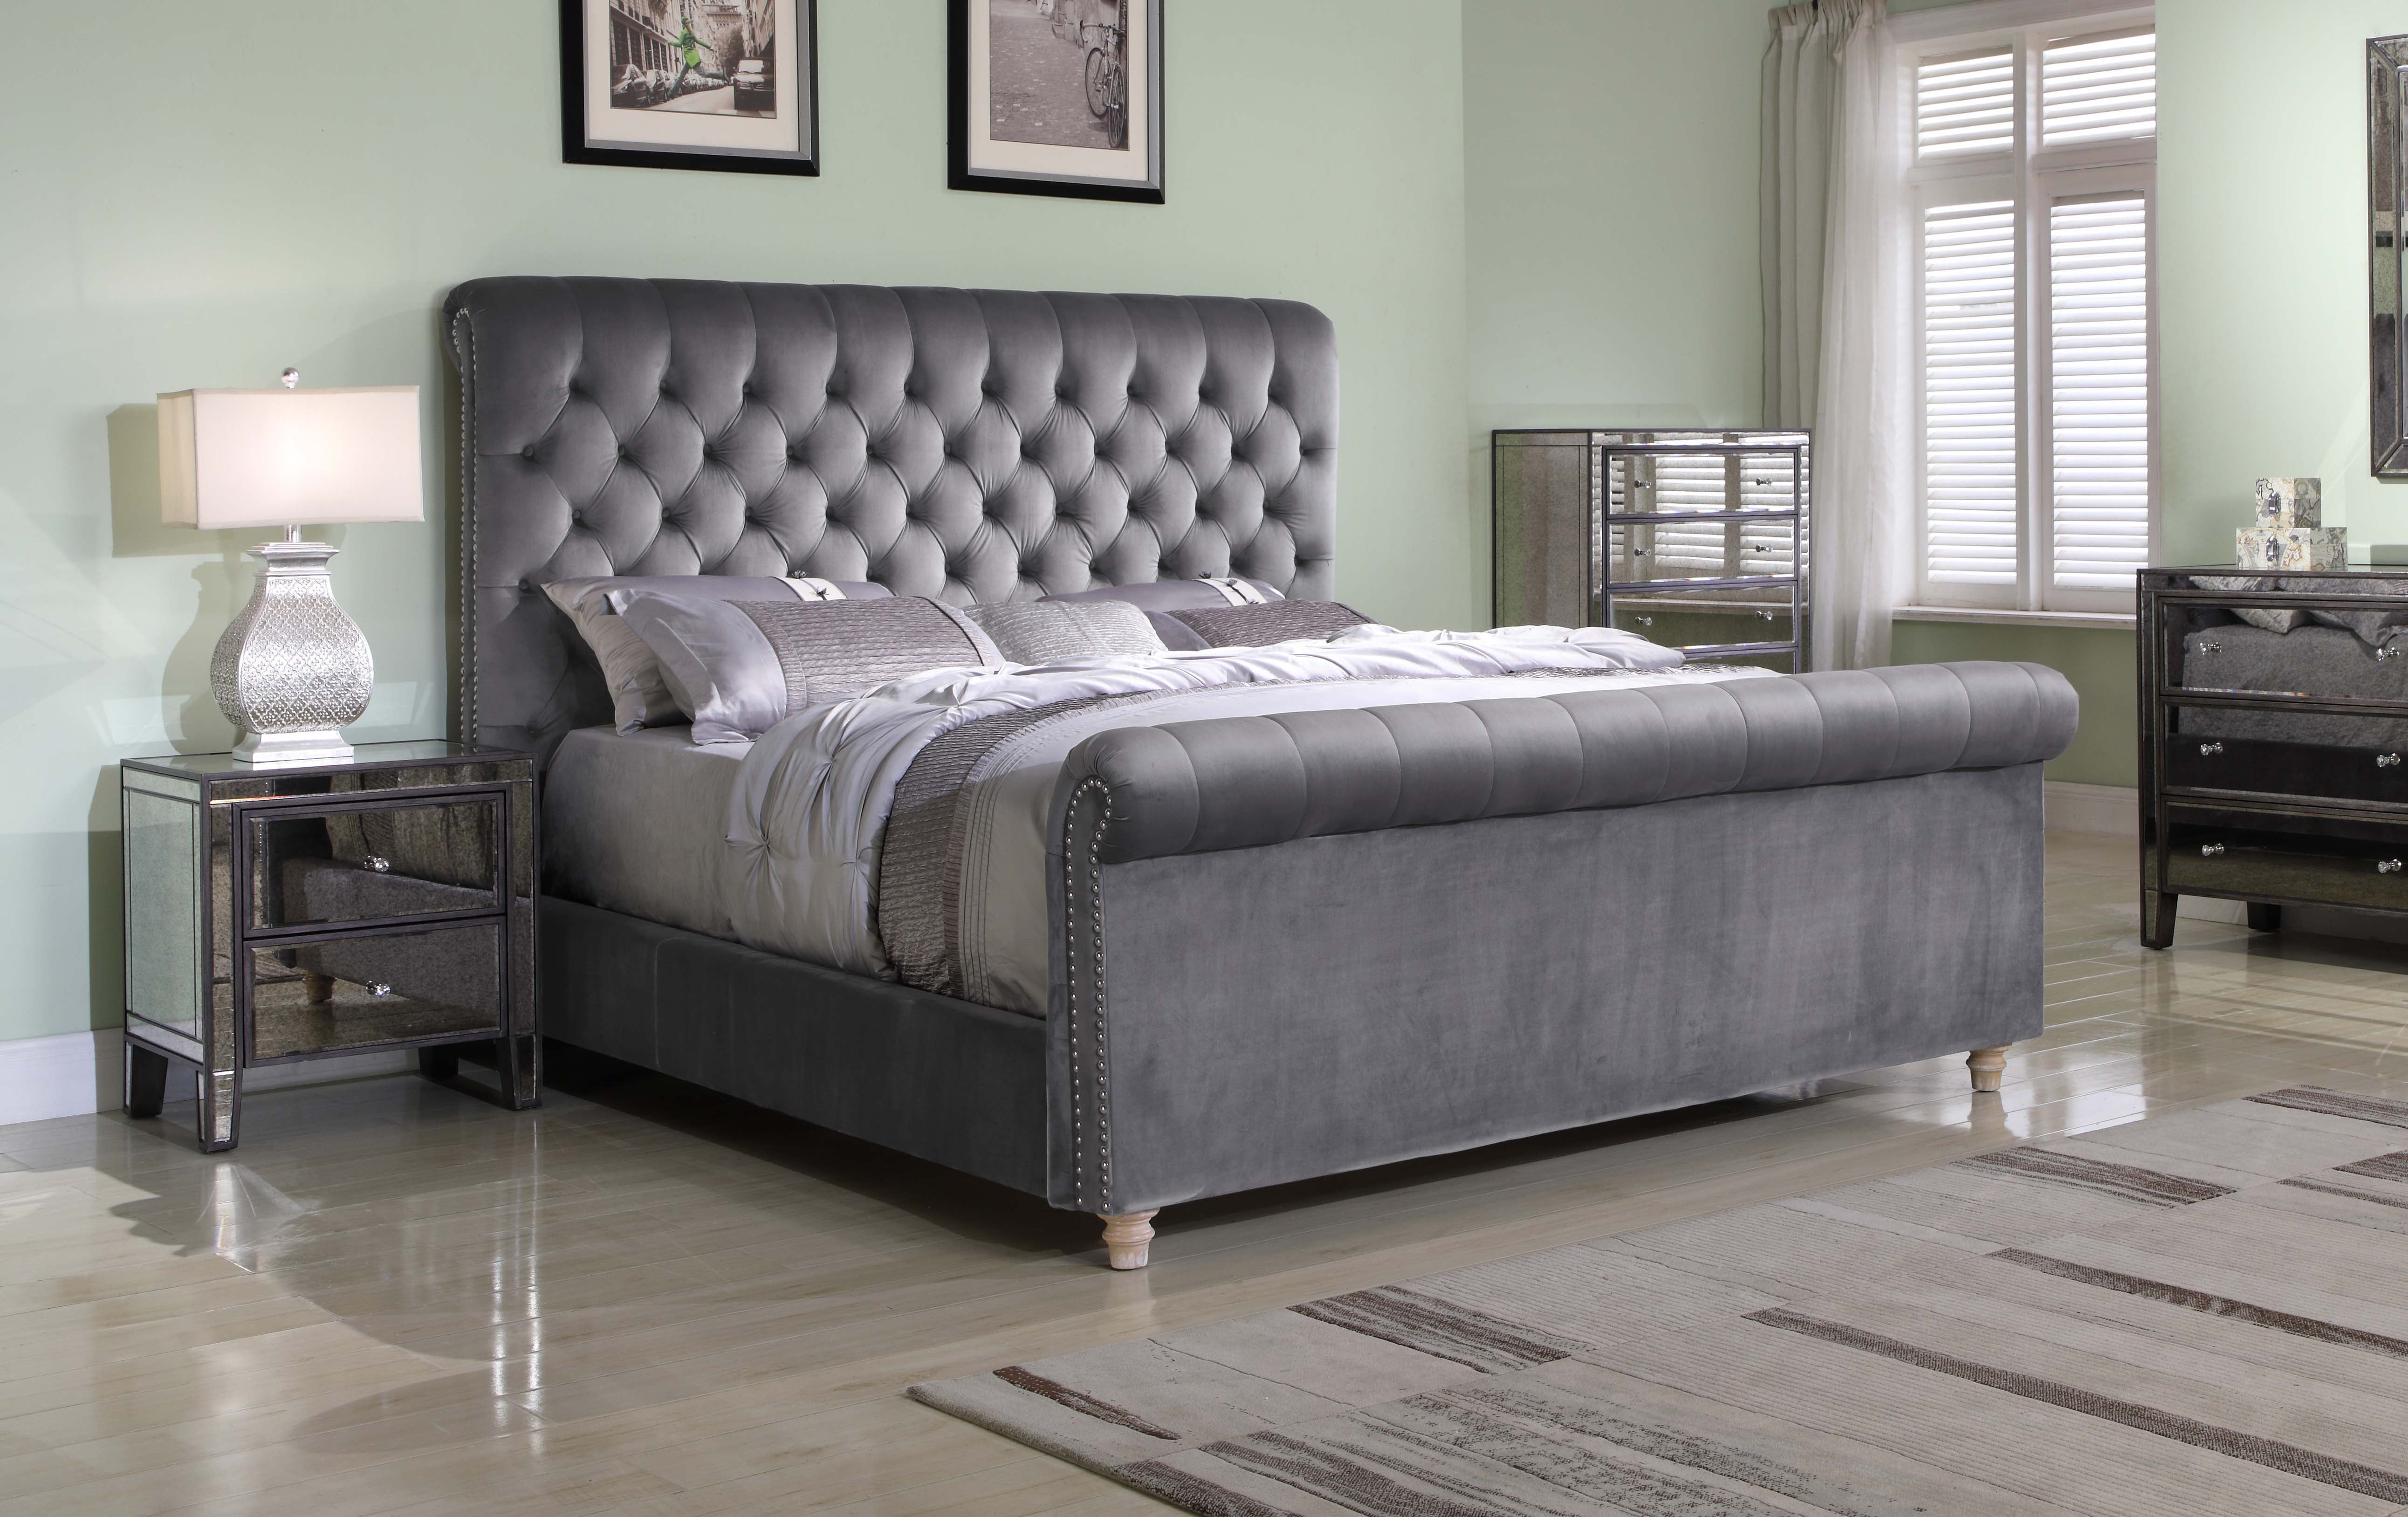 Best Master Furniture Jean Carrie, Upholstered Sleigh Bed King